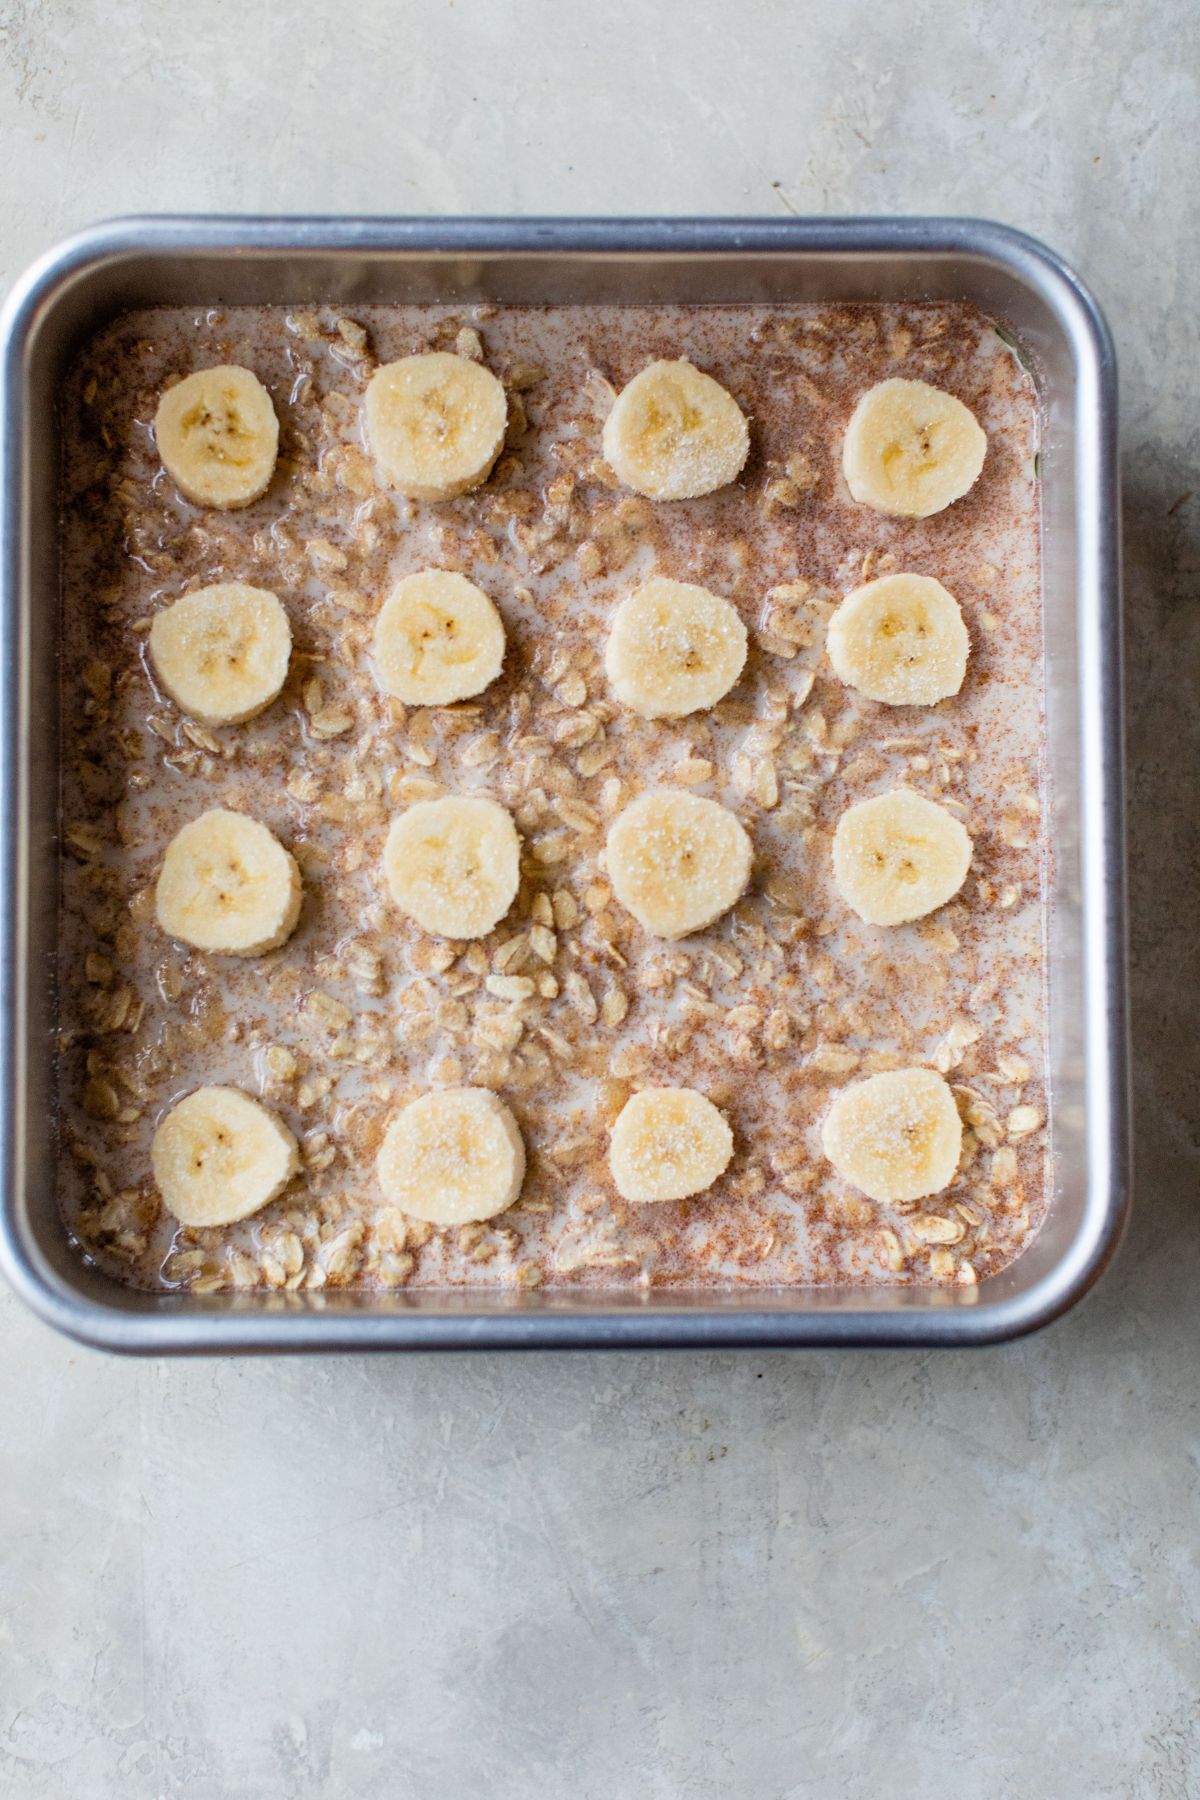 Oatmeal batter topped with sliced banana in pan.